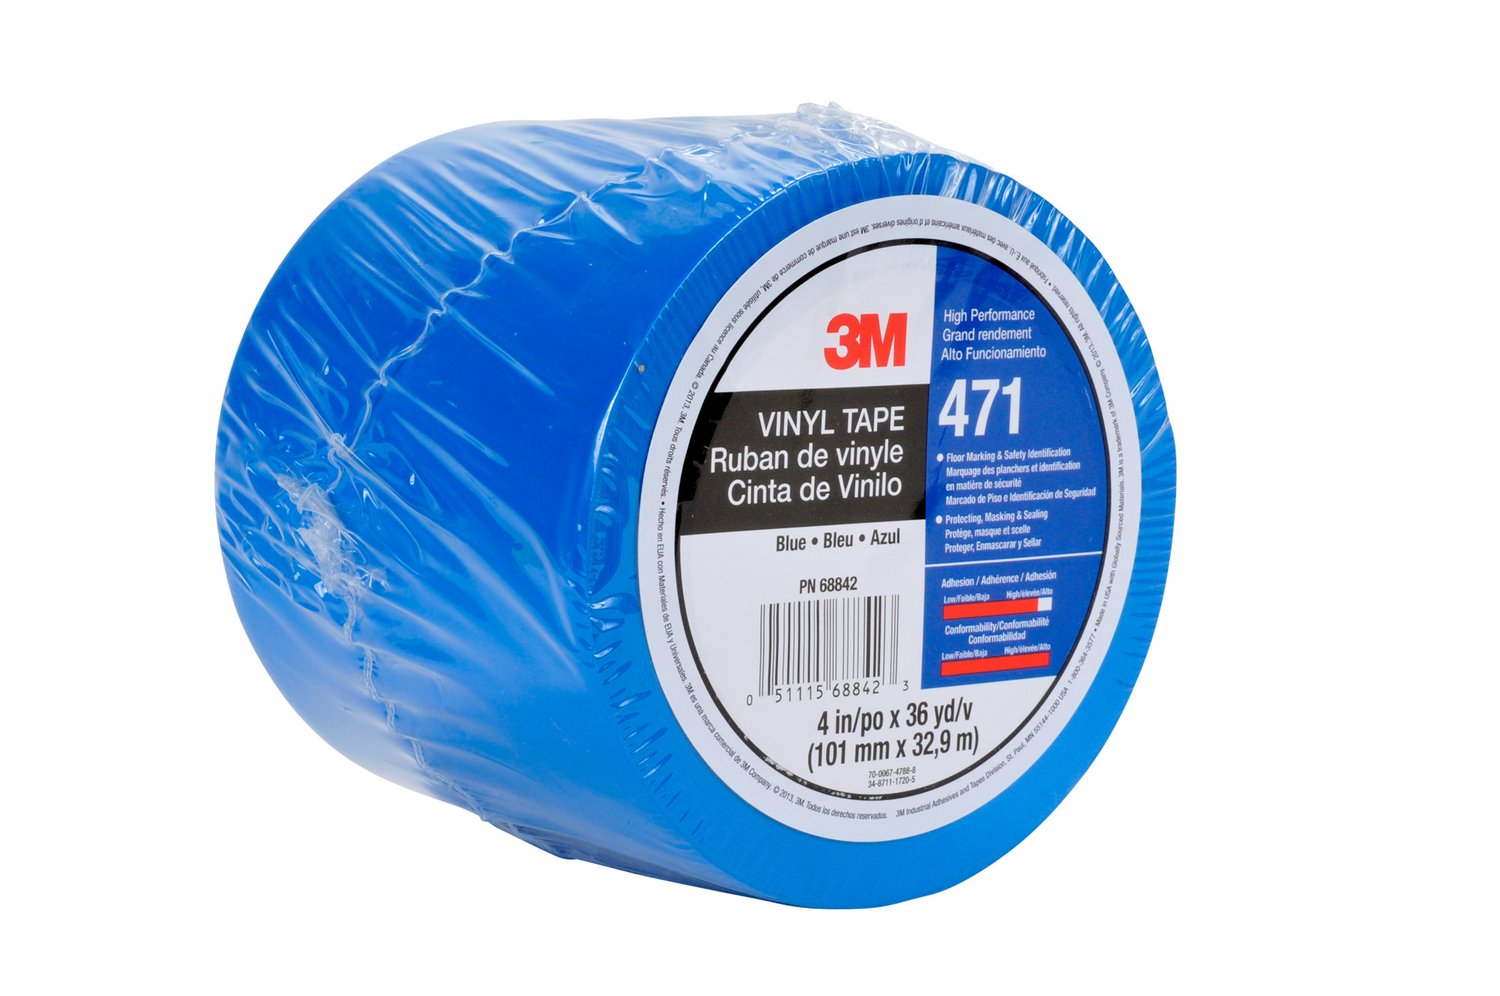 7010312448 - 3M Vinyl Tape 471, Blue, 4 in x 36 yd, 5.2 mil, 8 Roll/Case, Individually Wrapped Conveniently Packaged